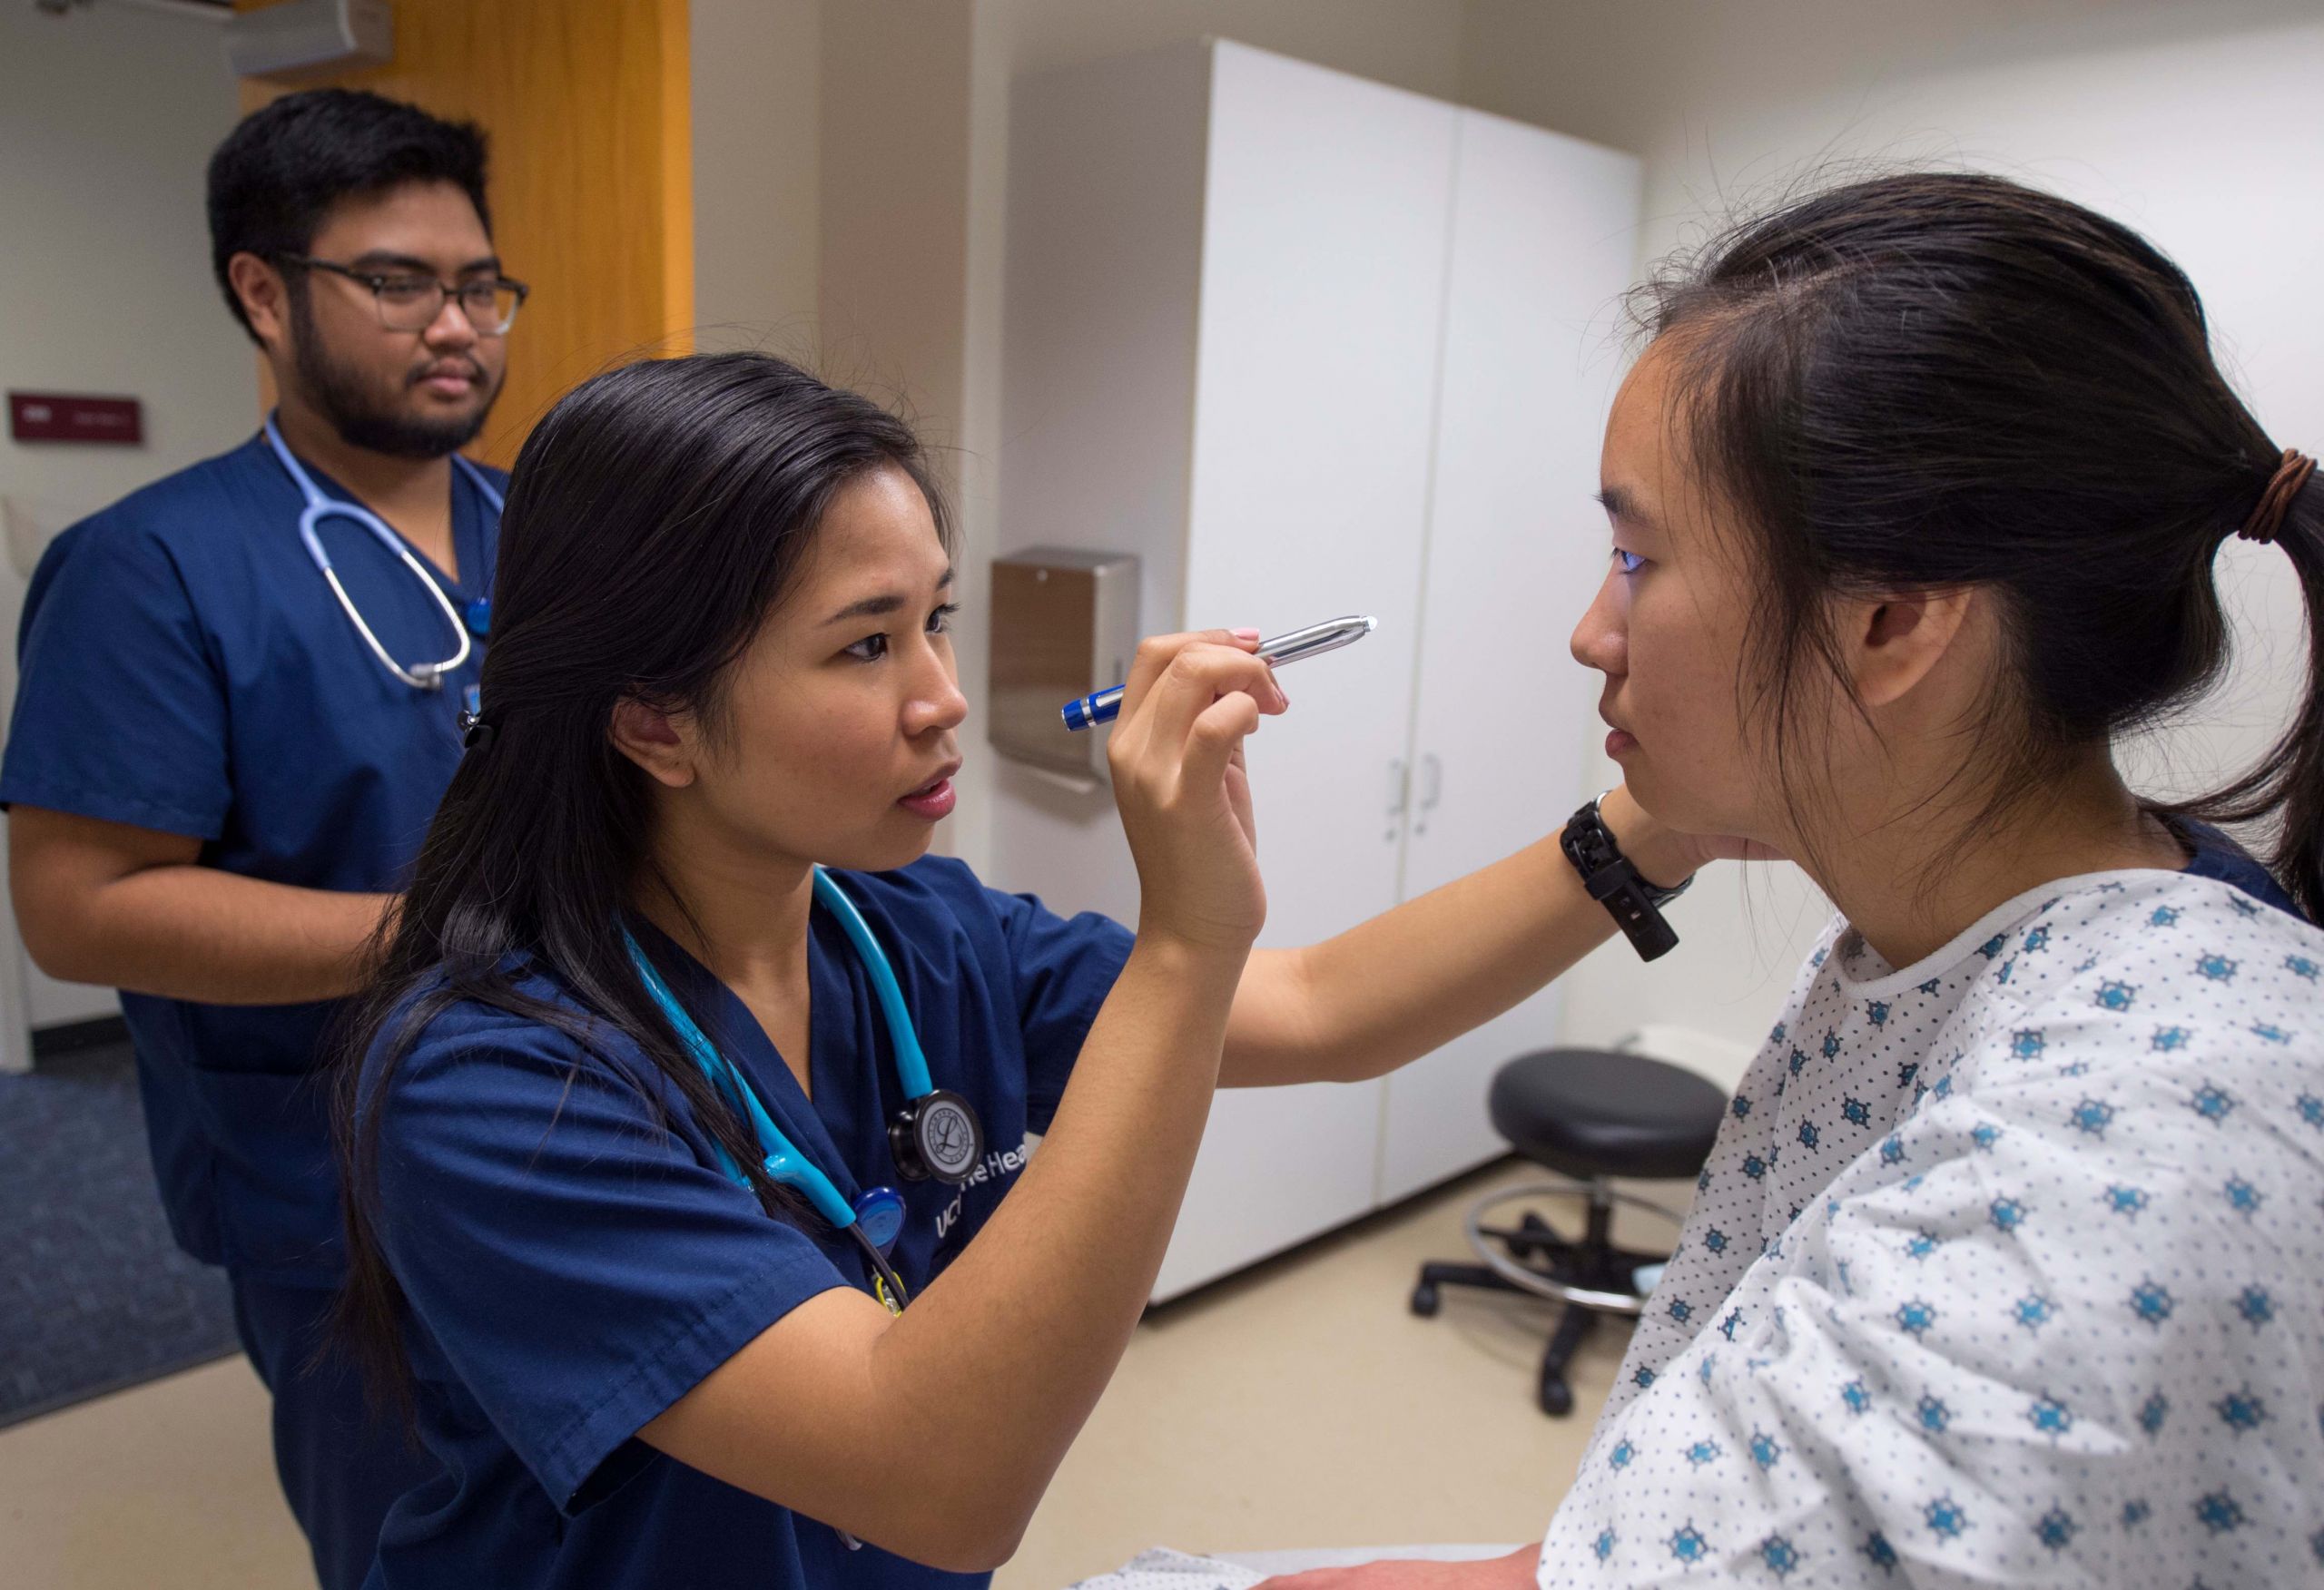 UCI school of nursing is one of California's best nursing schools and provides a variety of student clinical experiences